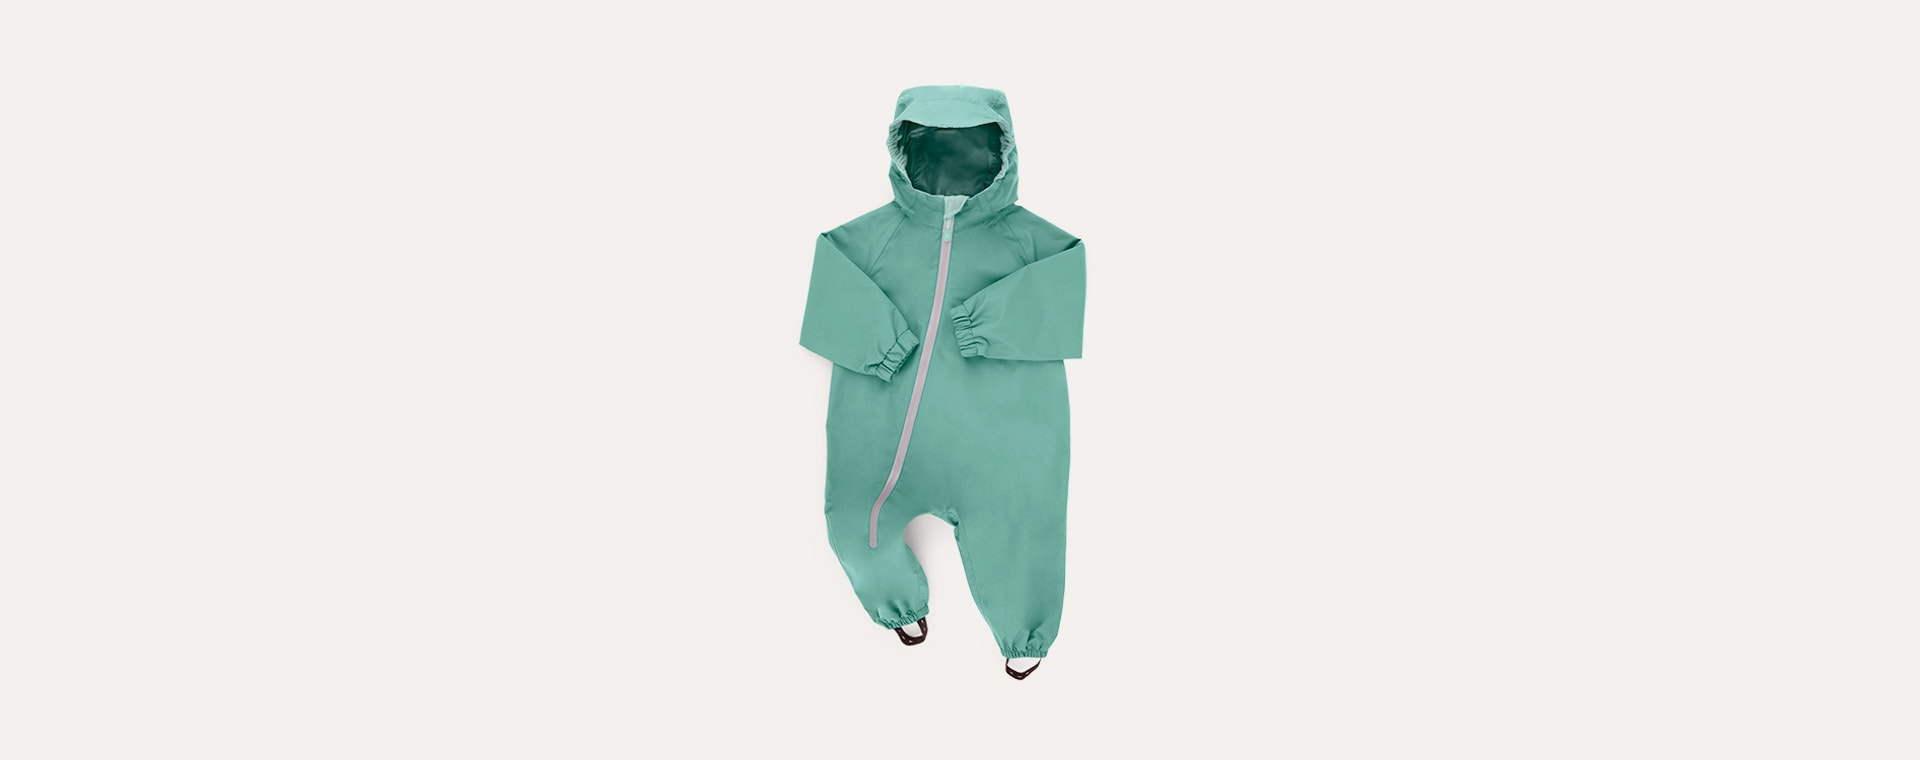 Pine KIDLY Label Puddle Suit